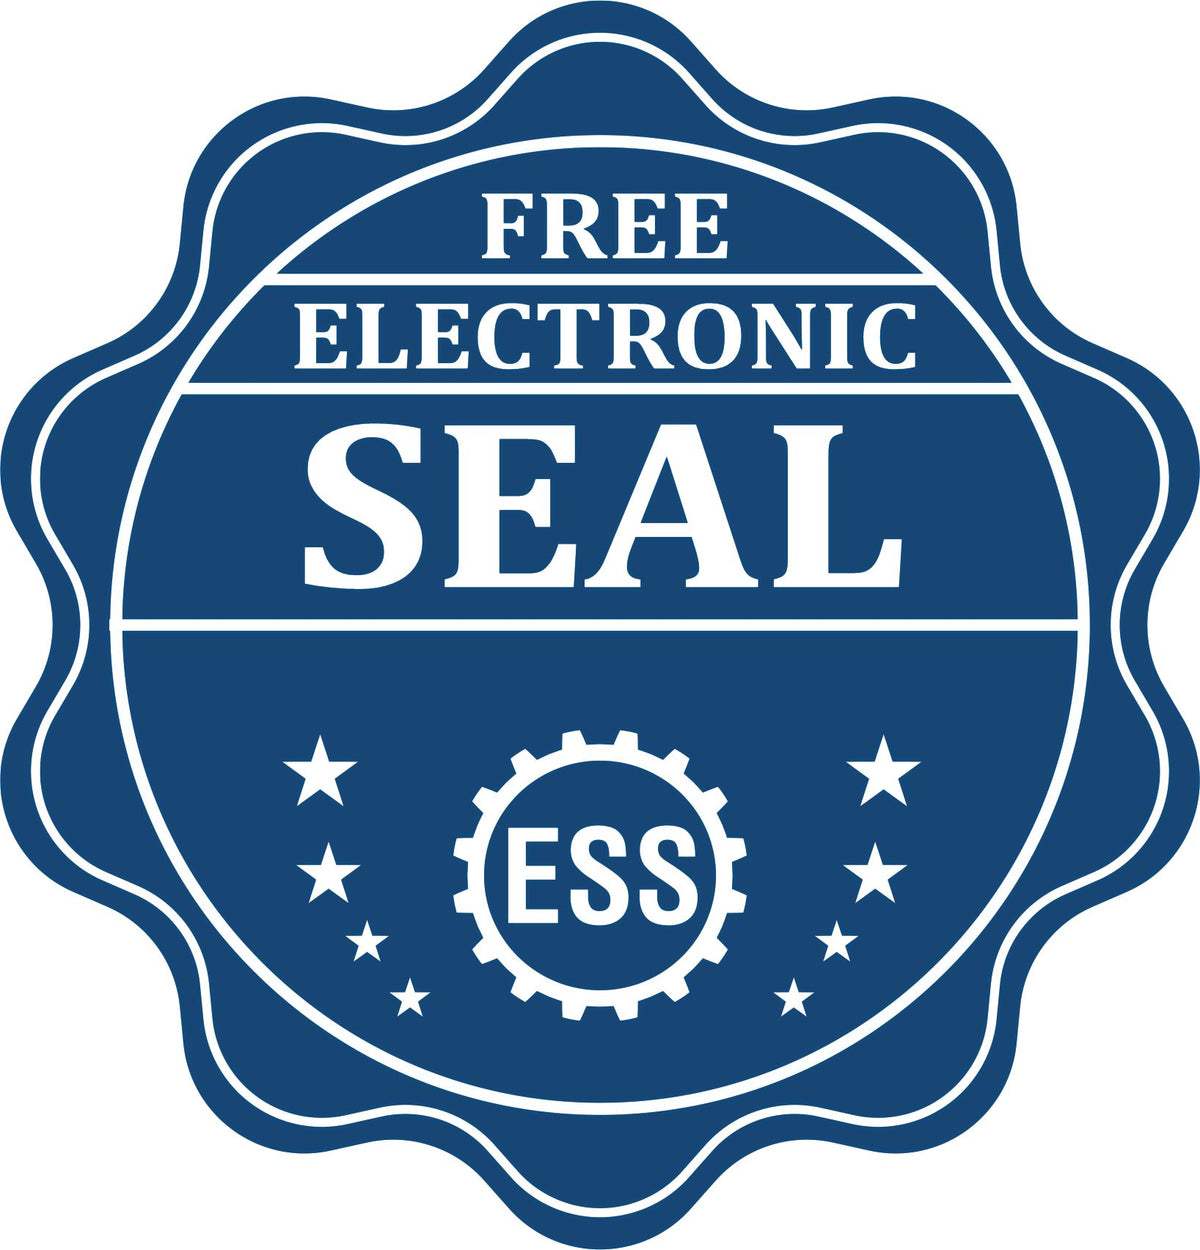 A badge showing a free electronic seal for the Long Reach Pennsylvania Geology Seal with stars and the ESS gear on the emblem.